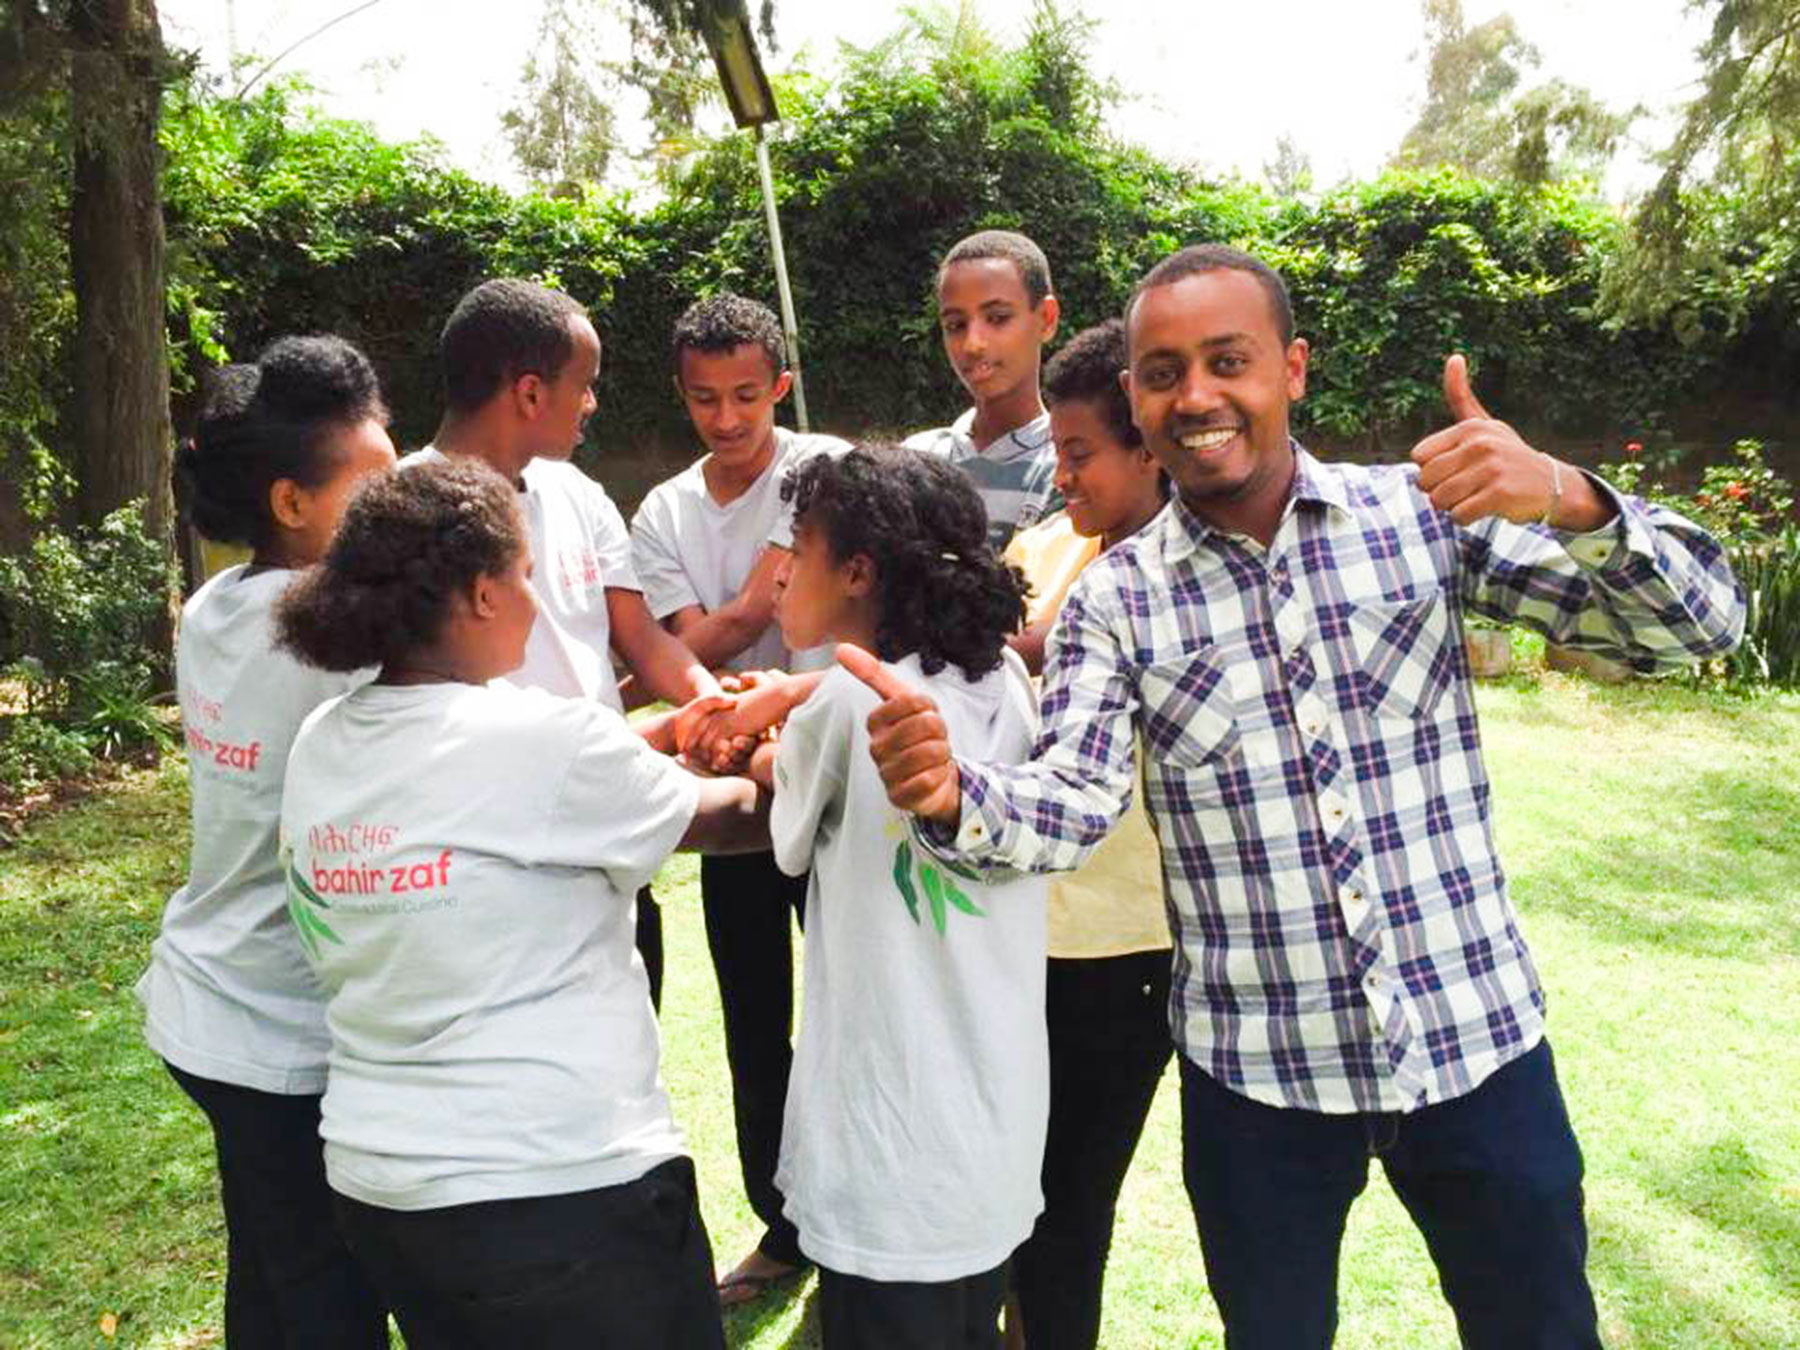 Heyi working with at-risk young people through Friends International